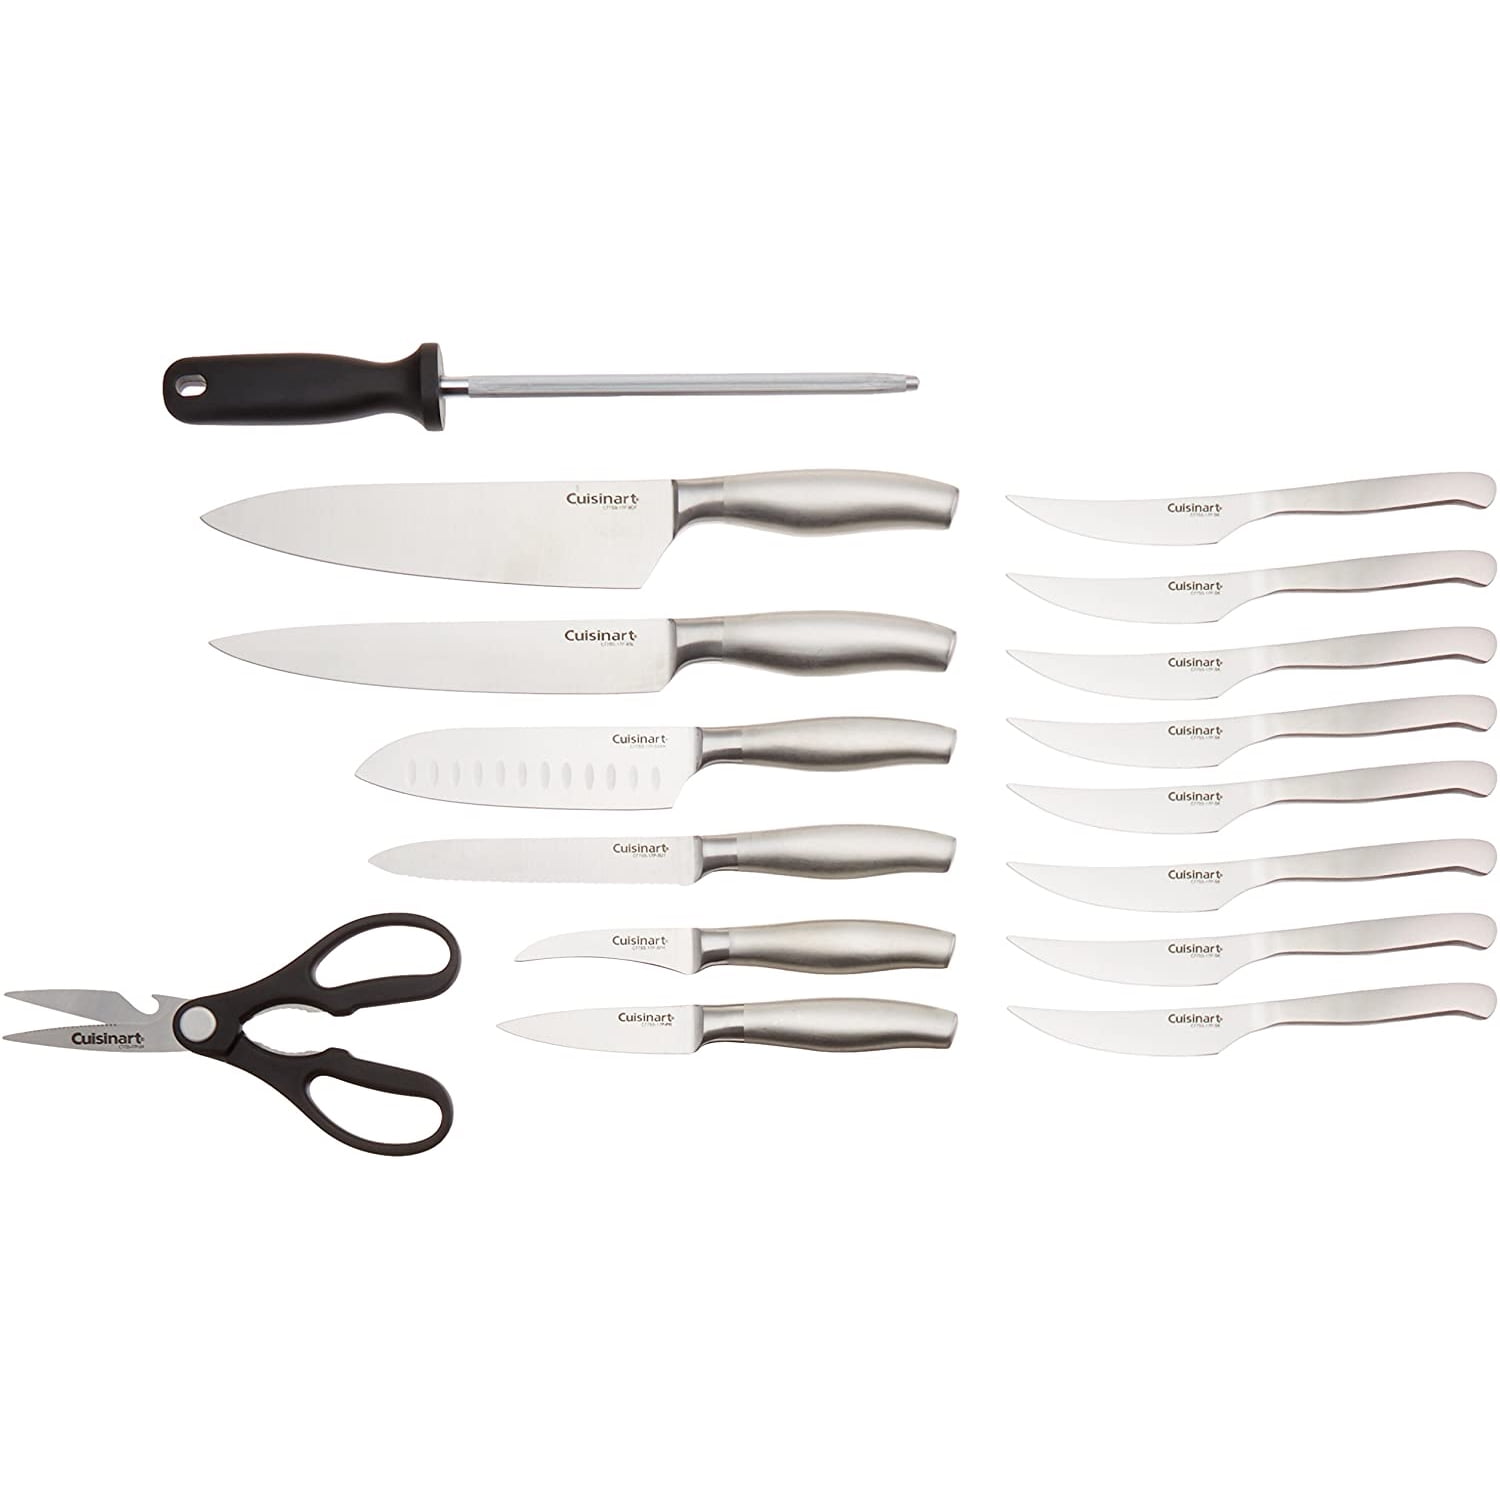 Knife Sets for Kitchen with Block, 17 Pcs with Boning Knife and Carving  Fork,with German Stainless Steel and Full-Tang Design - Bed Bath & Beyond -  34540047